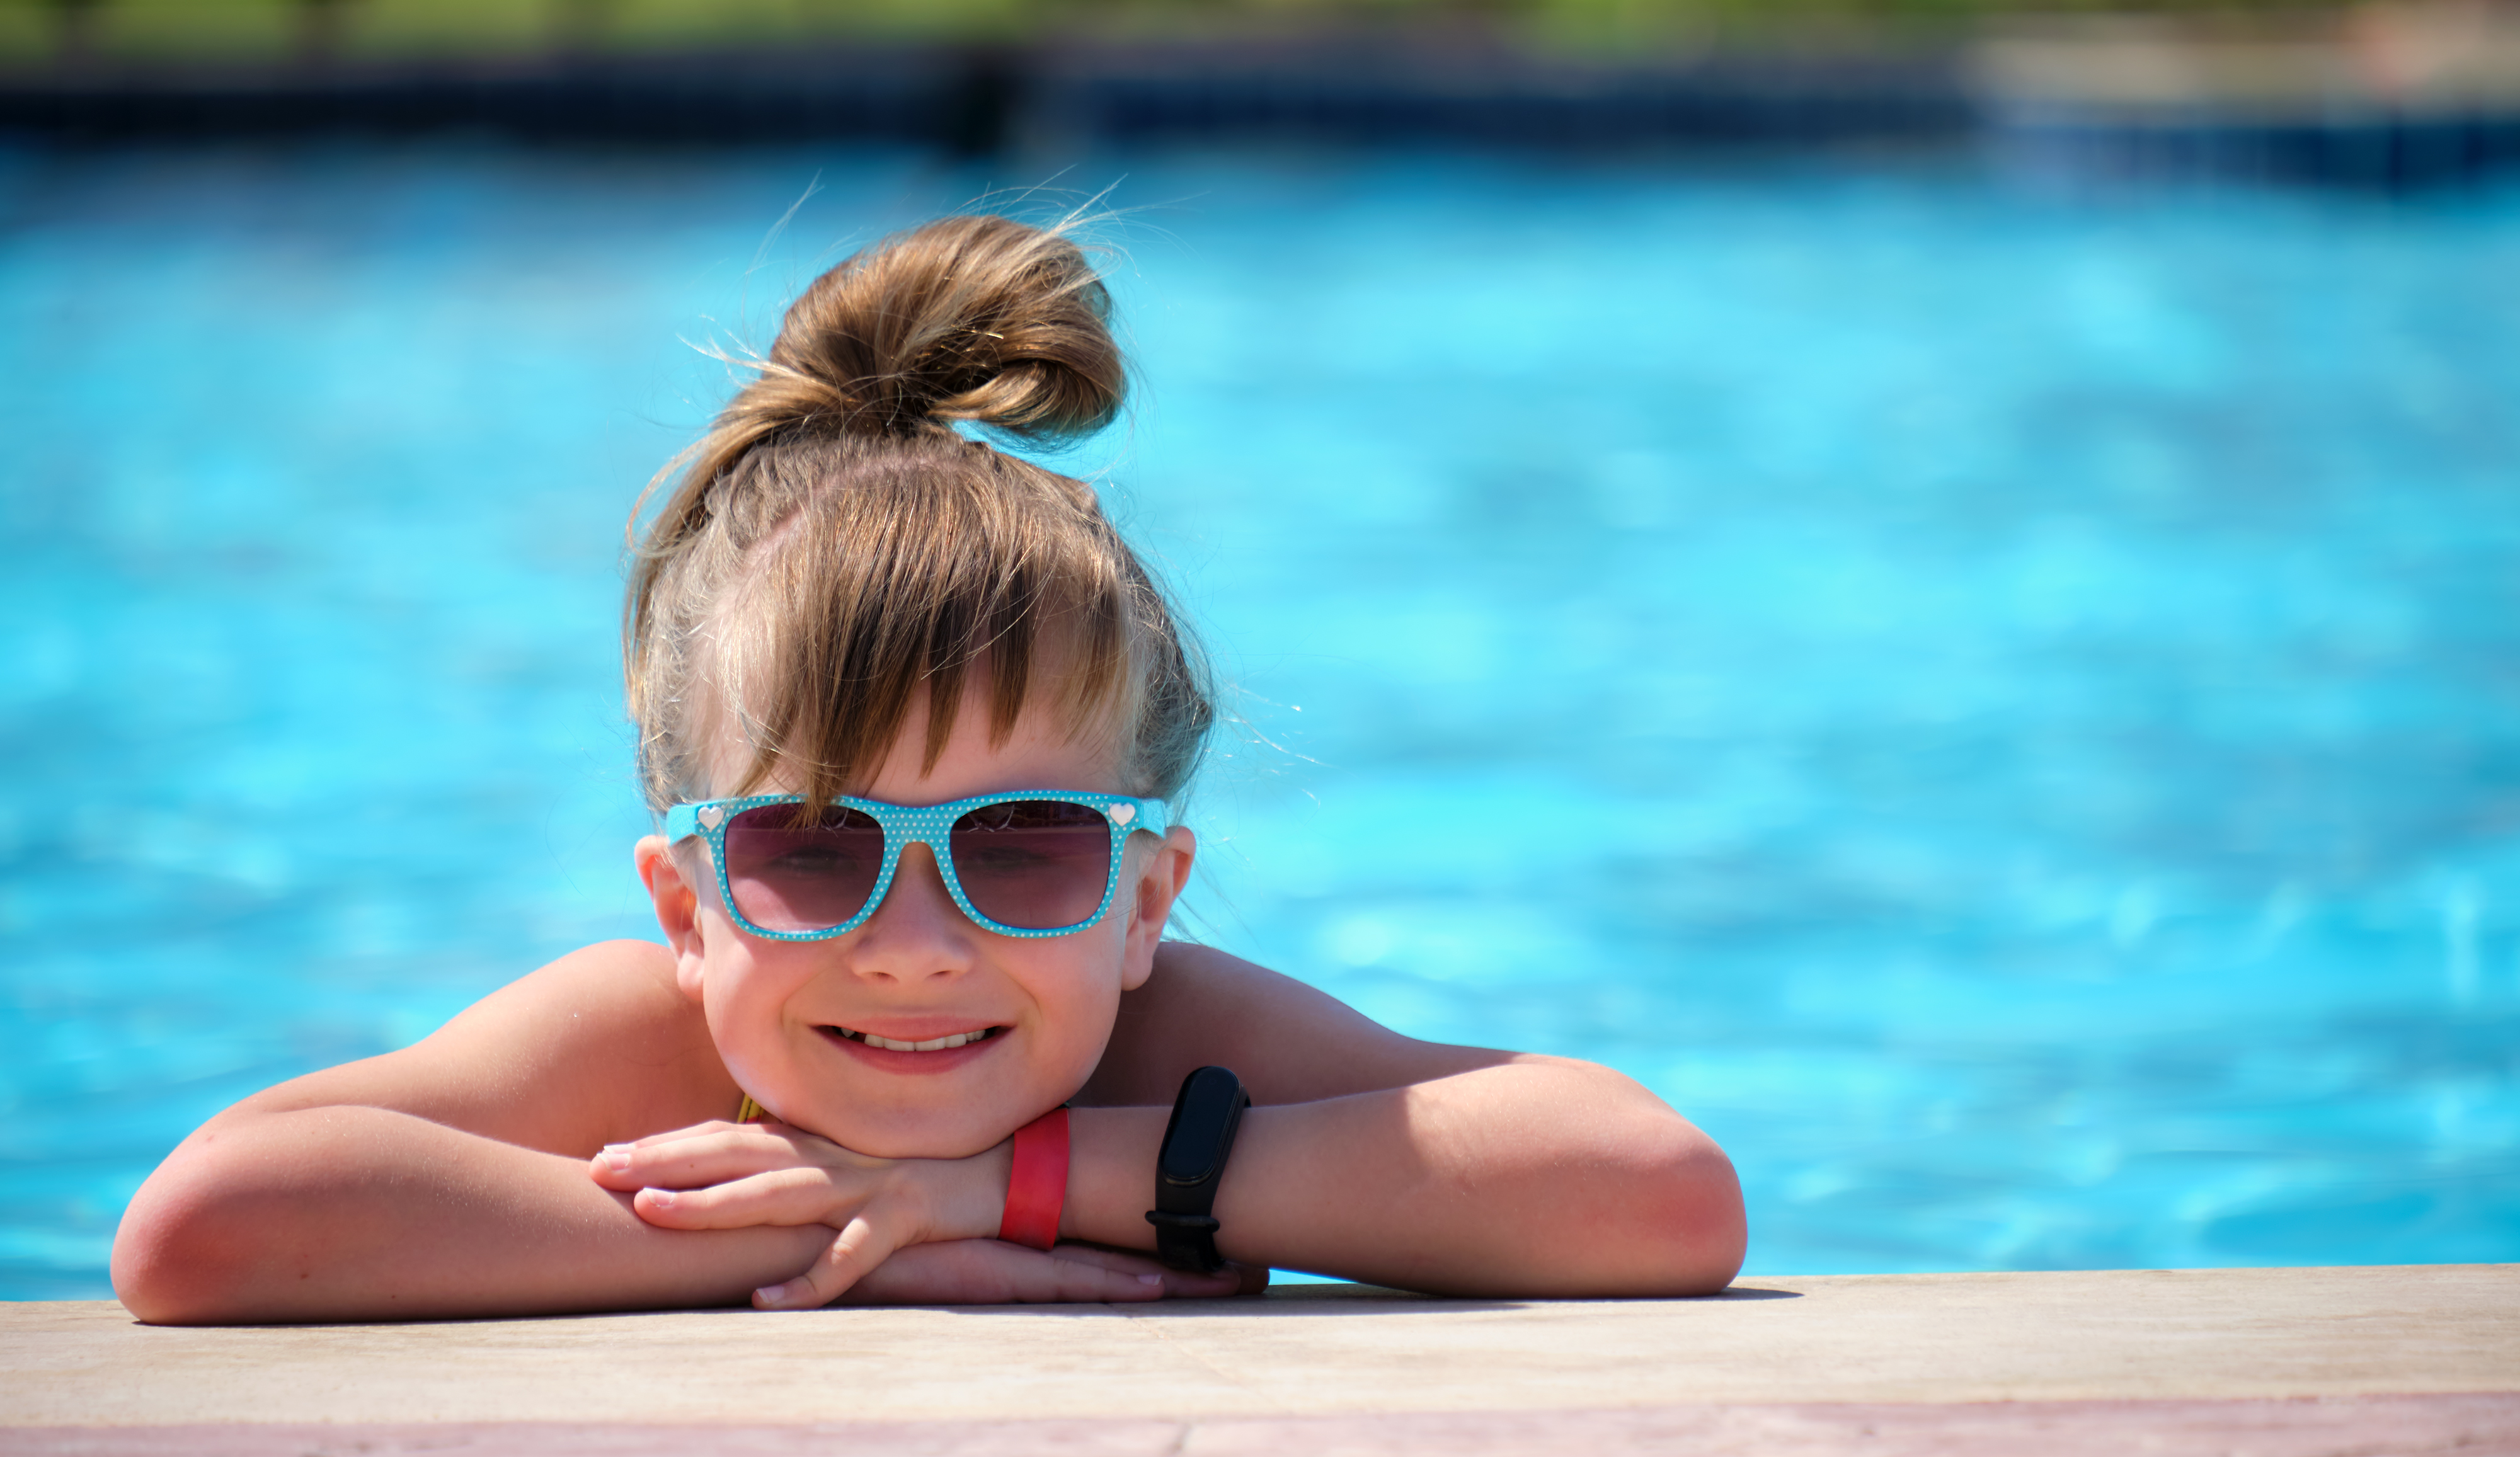 Happy child relaxing in the pool